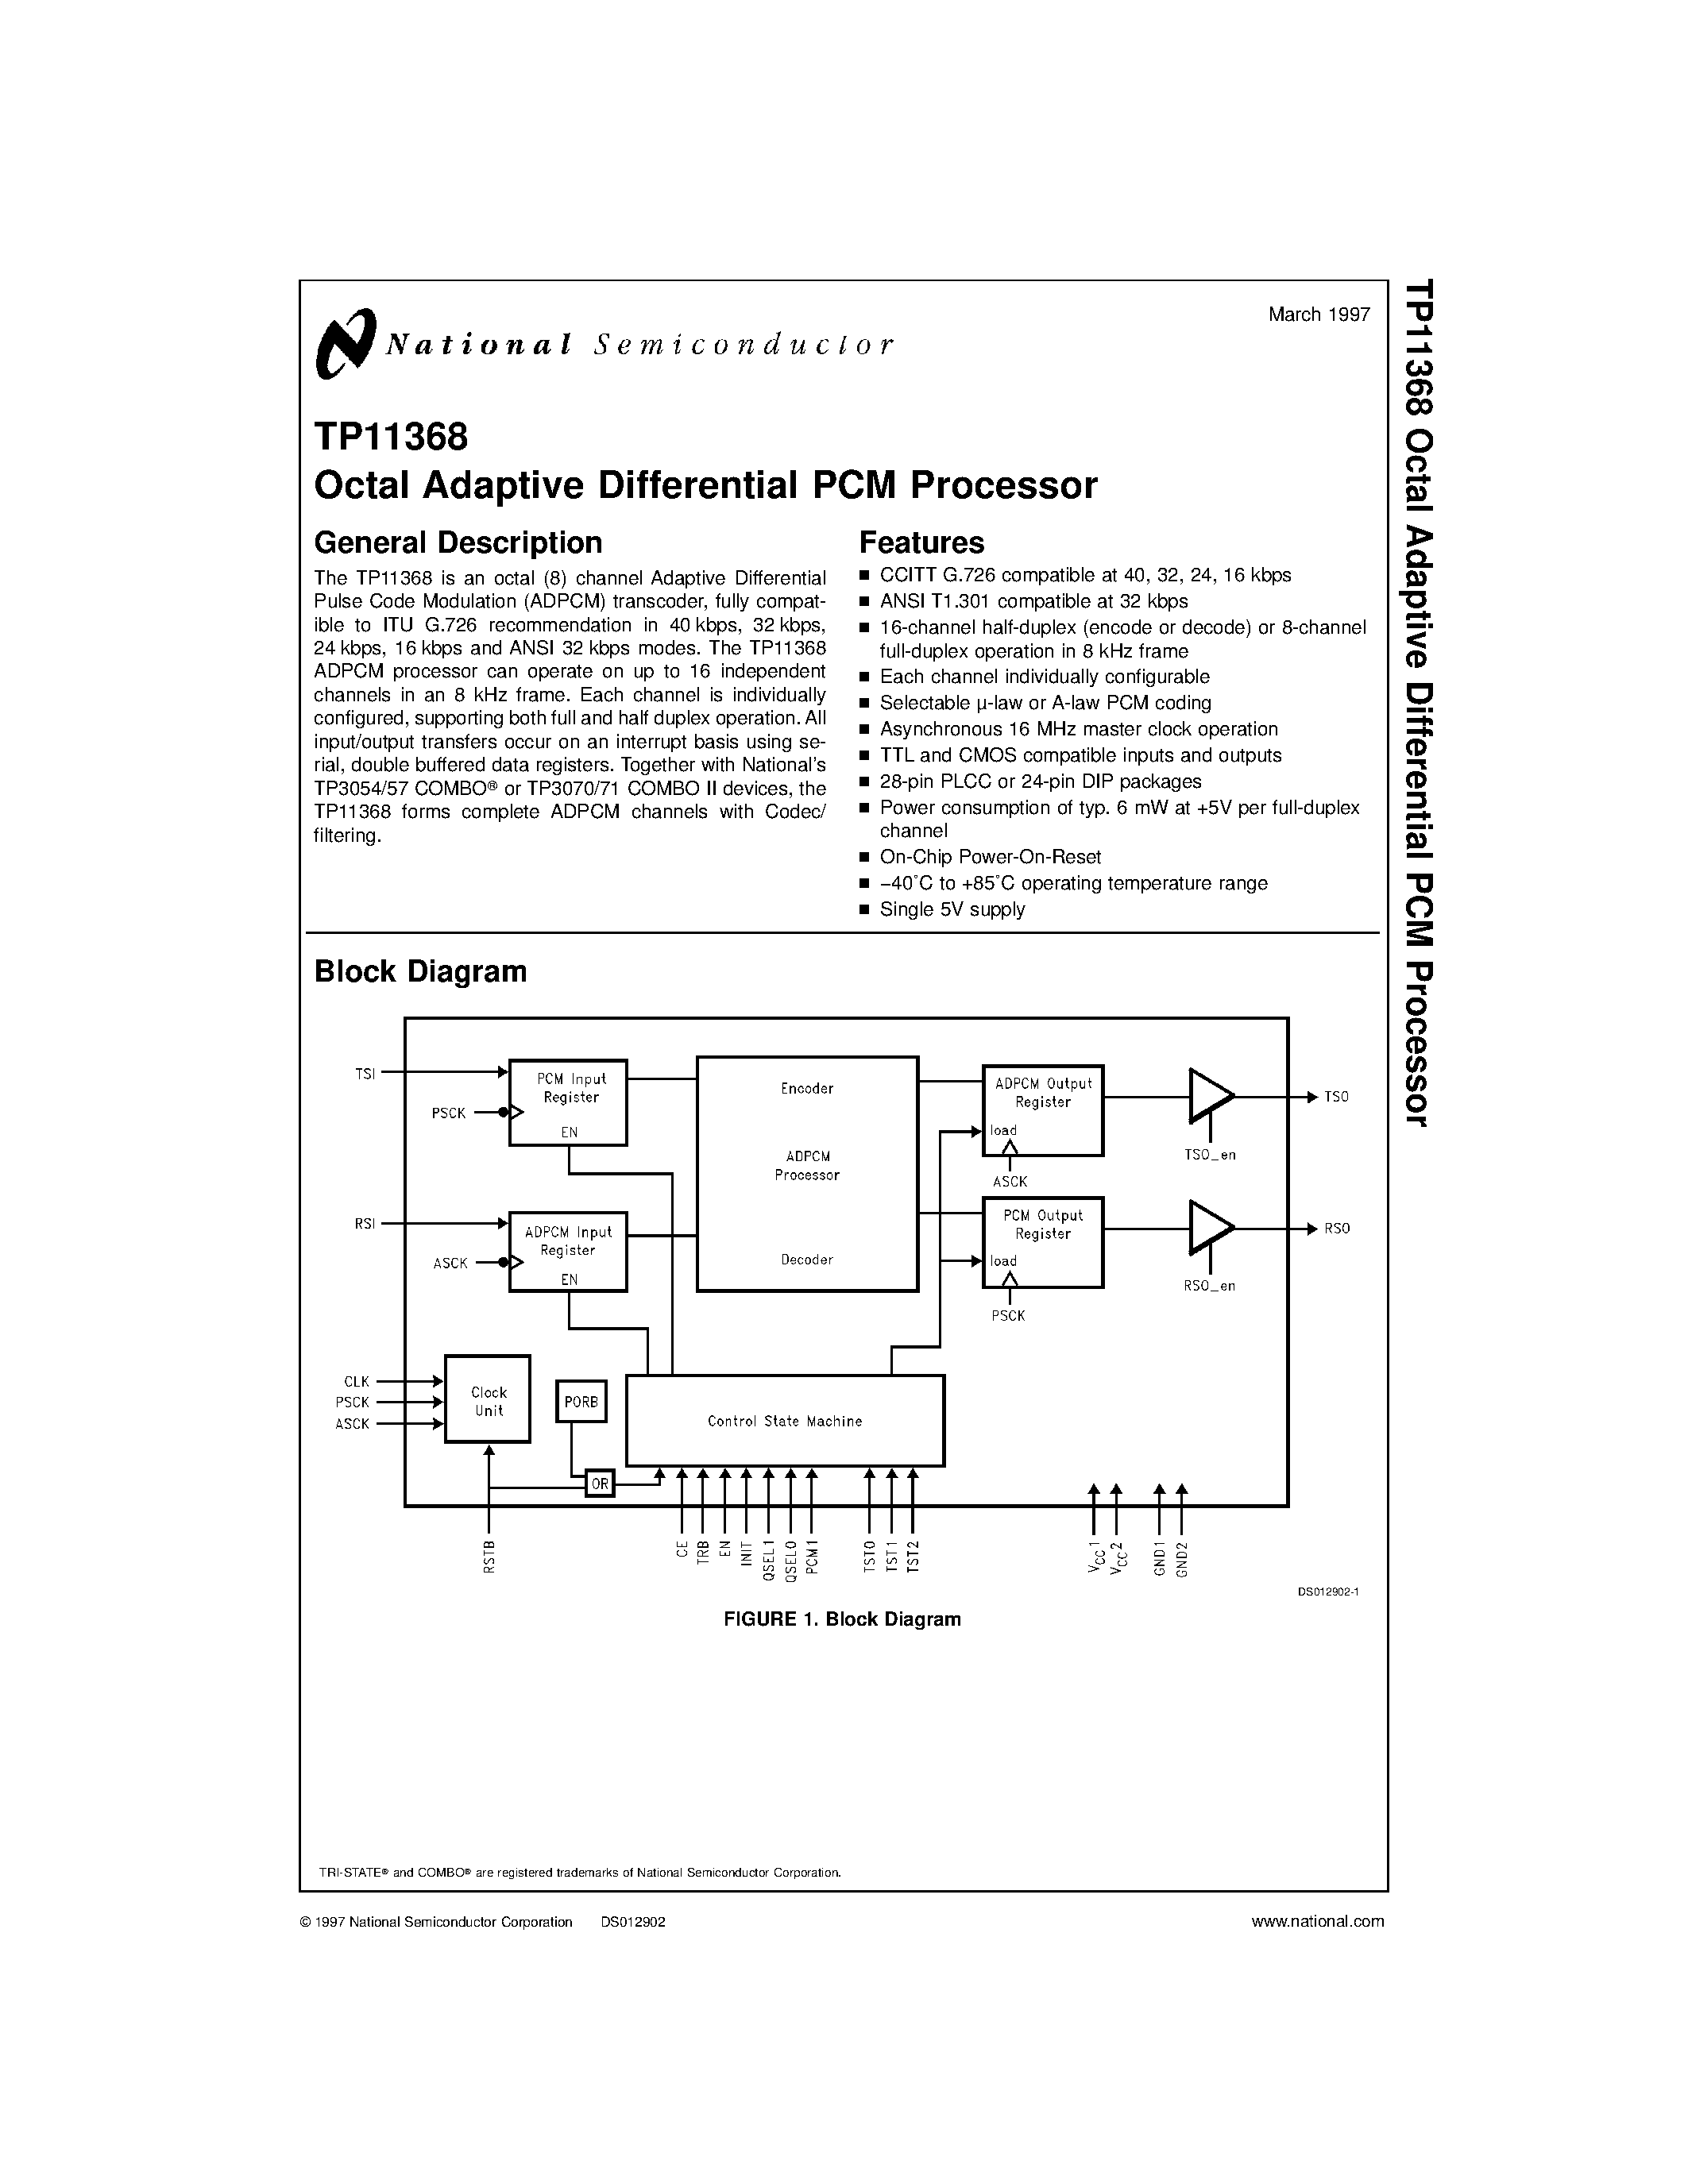 Datasheet TP11368 - Octal Adaptive Differential PCM Processor page 1